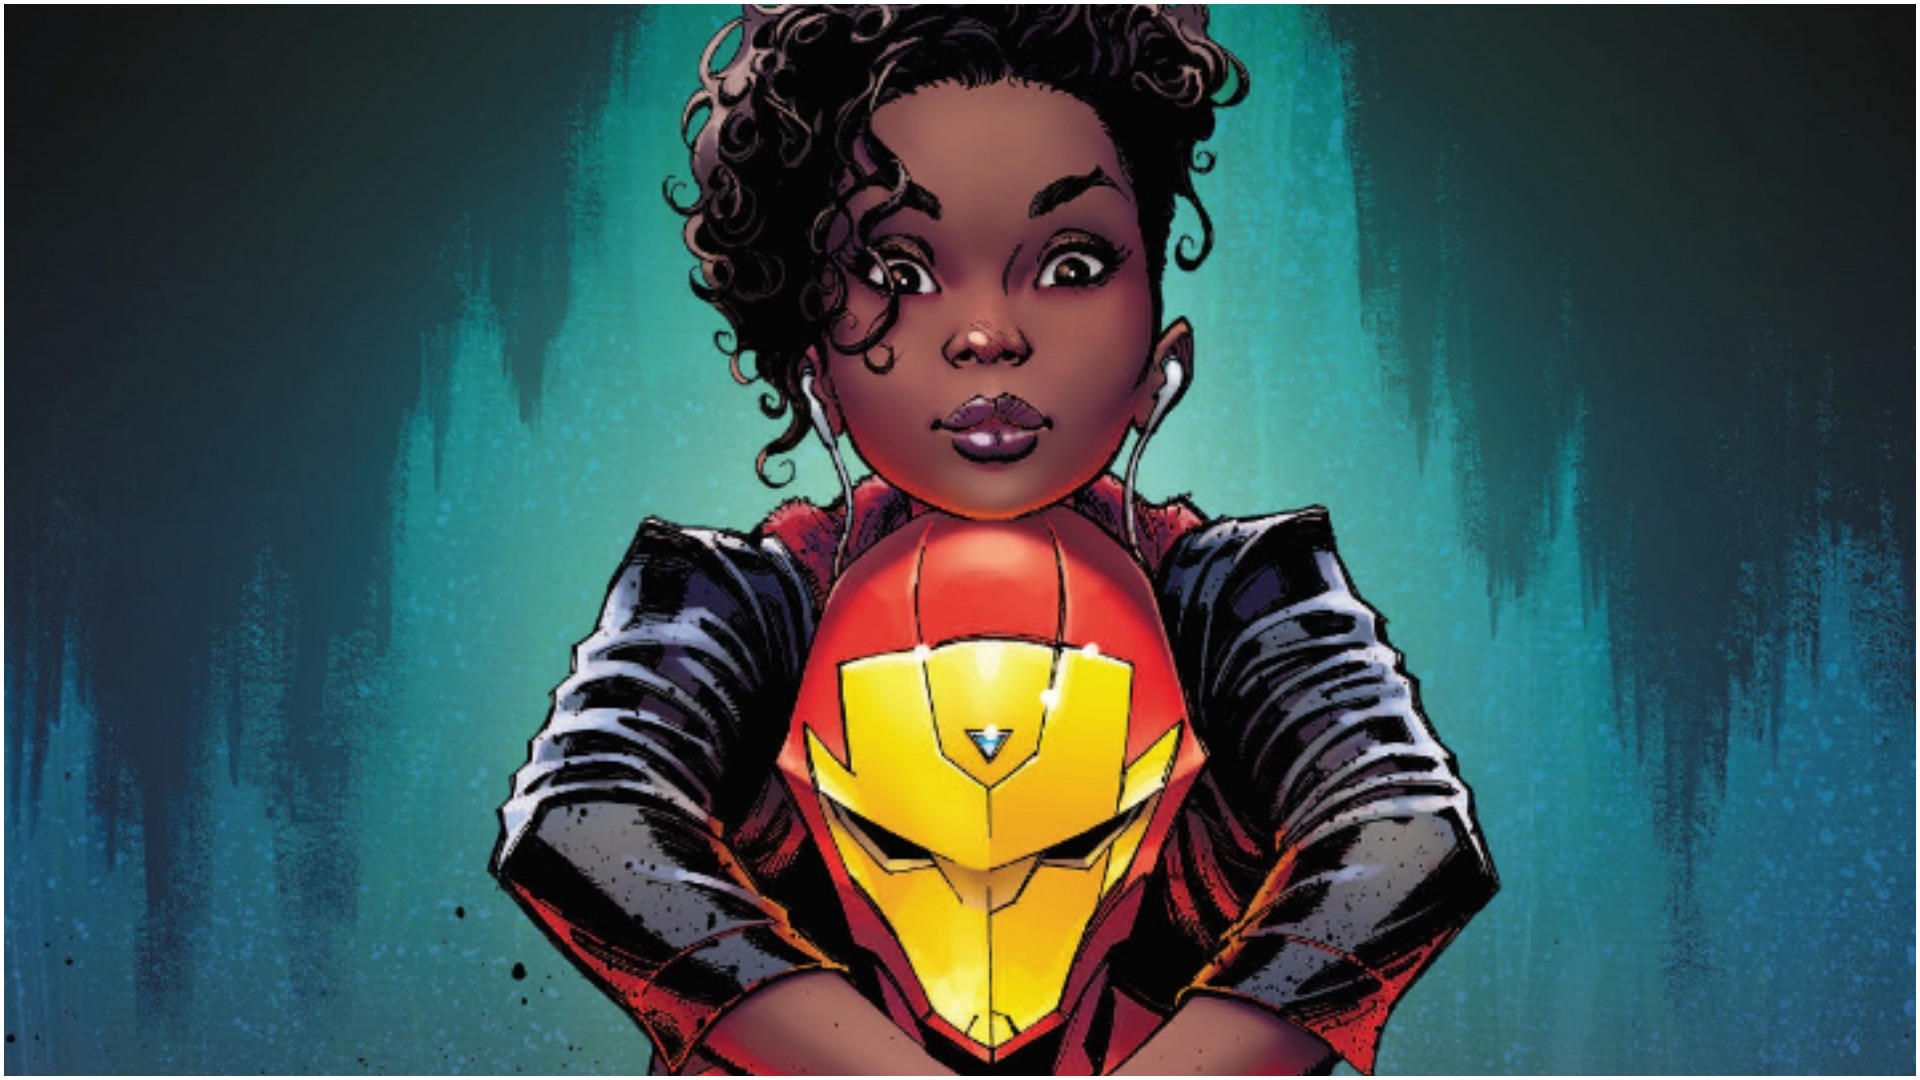 Ironheart Marvel series sets directors – and Ryan Coogler will executive produce